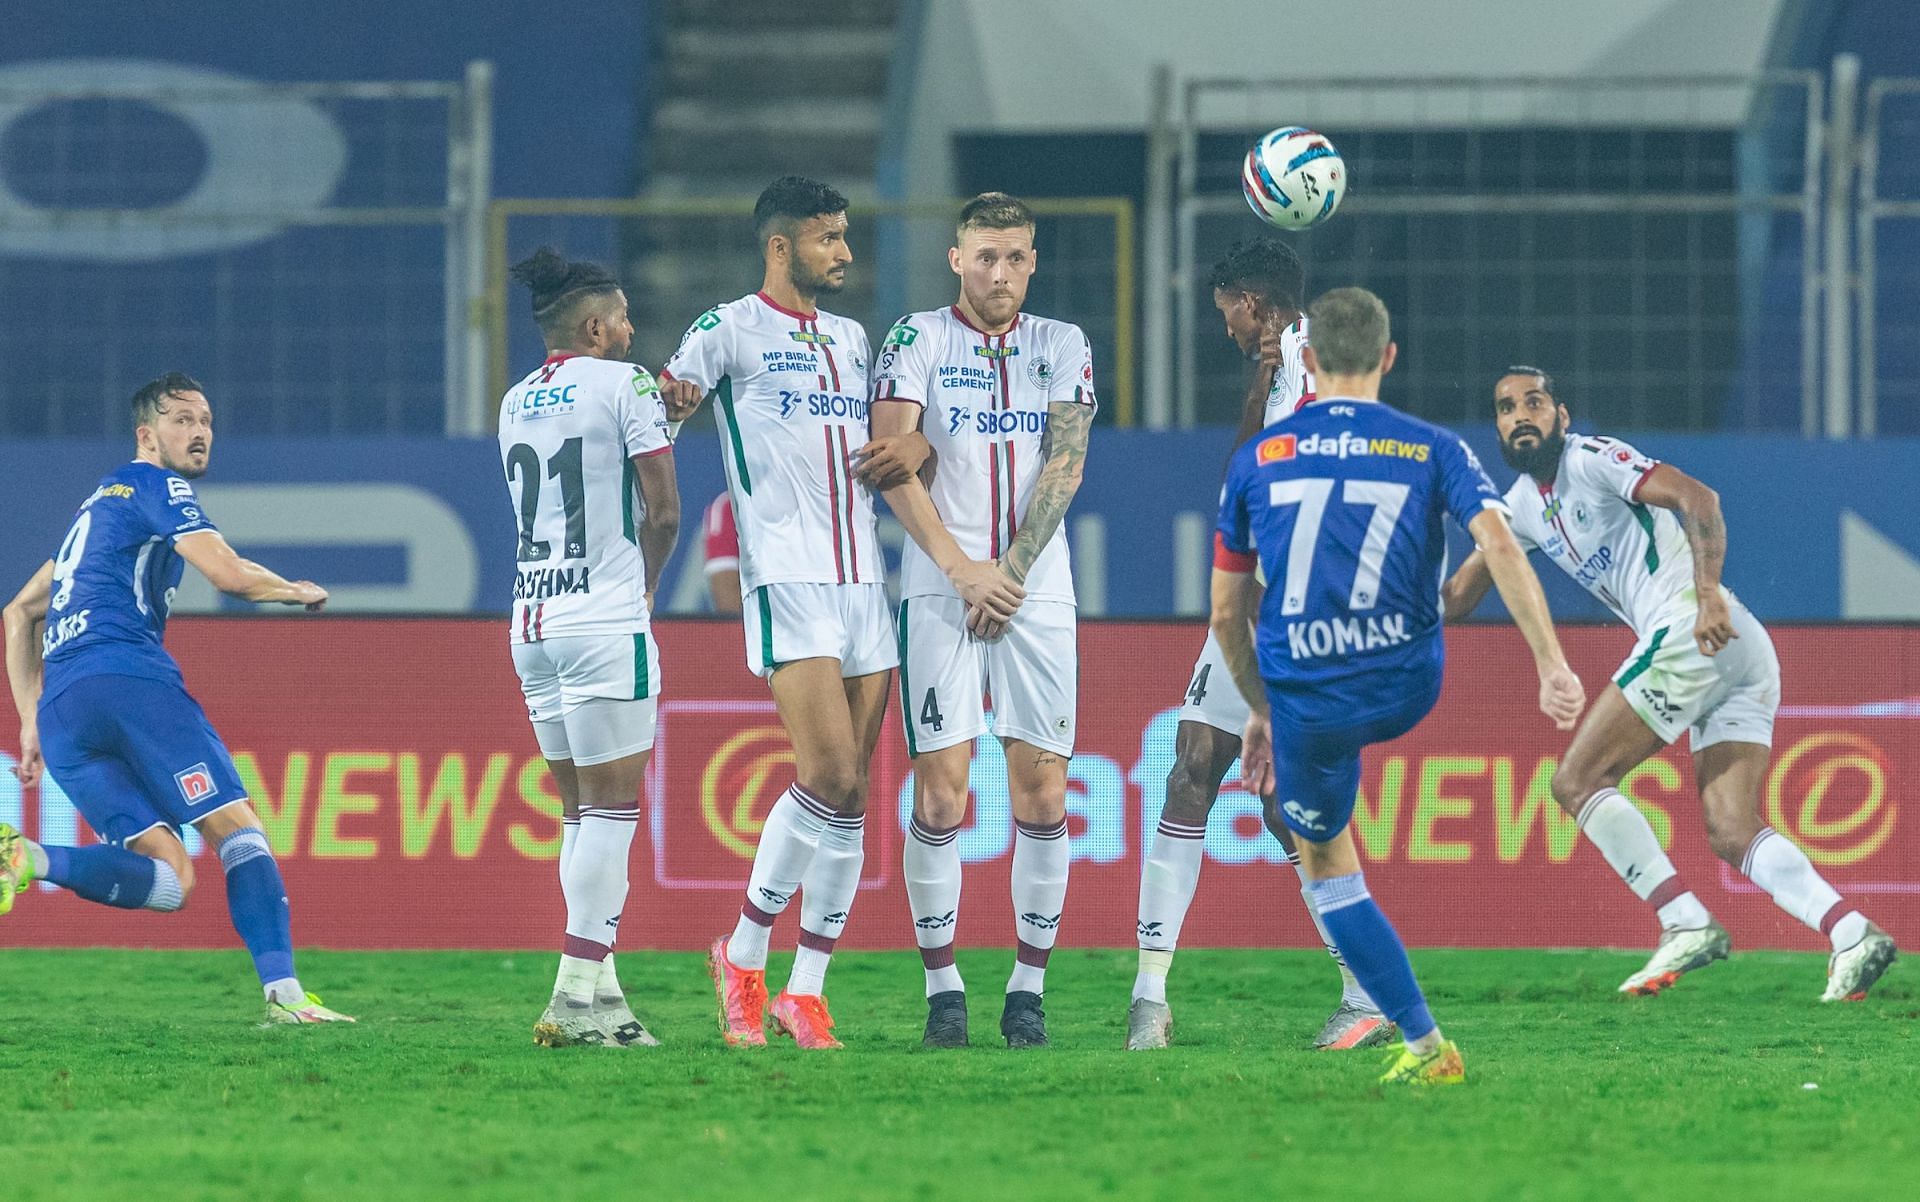 ATK Mohun Bagan defended well to win against Chennaiyin FC. [Credits: ISL]